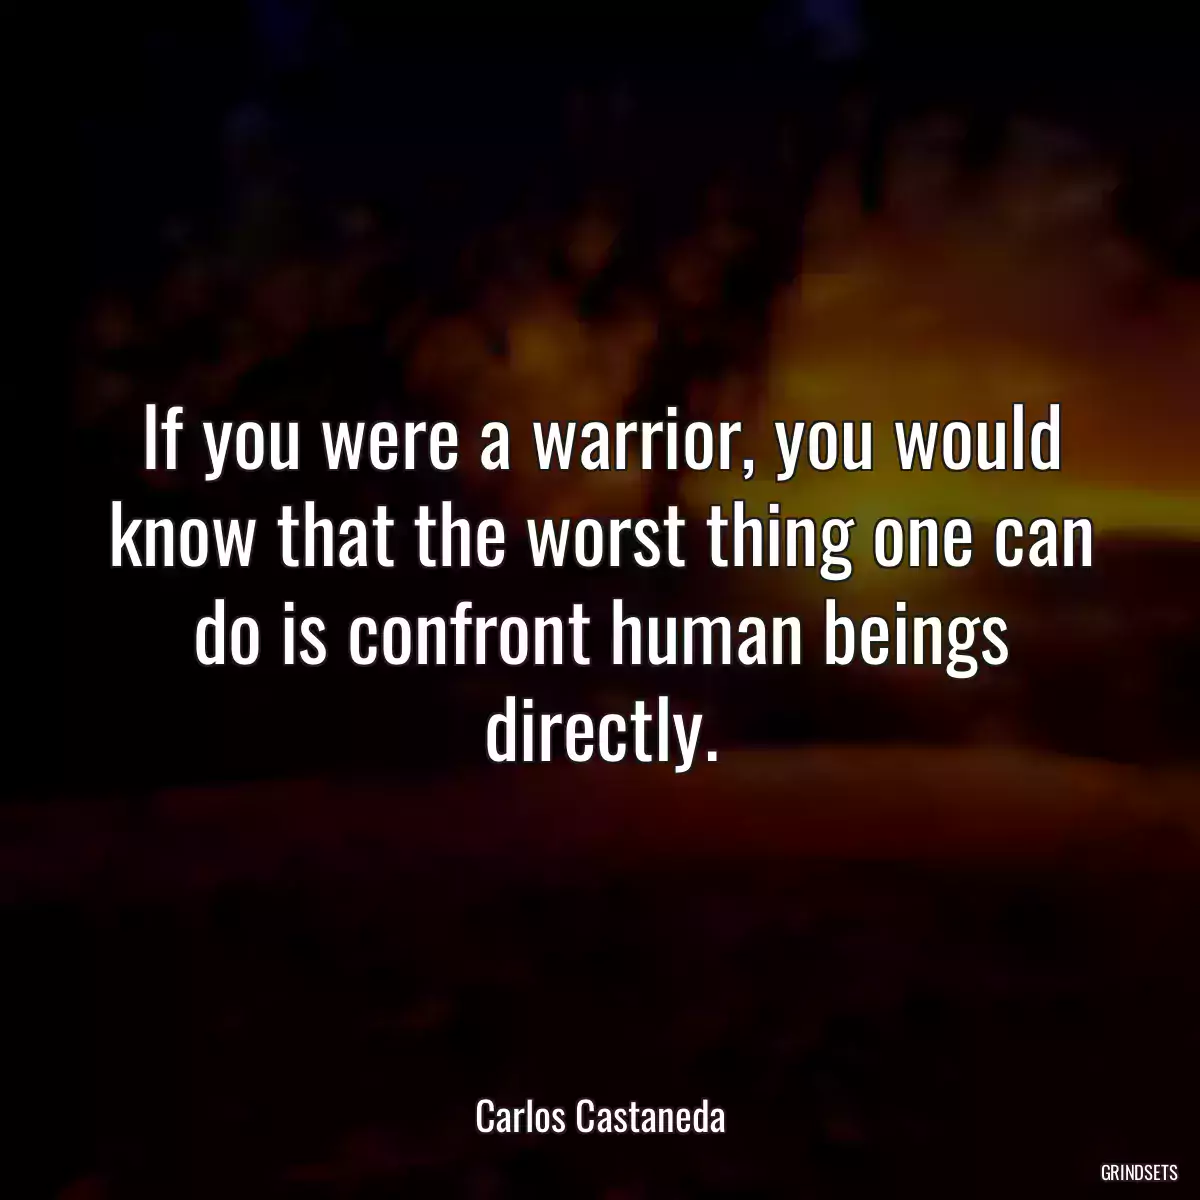 If you were a warrior, you would know that the worst thing one can do is confront human beings directly.